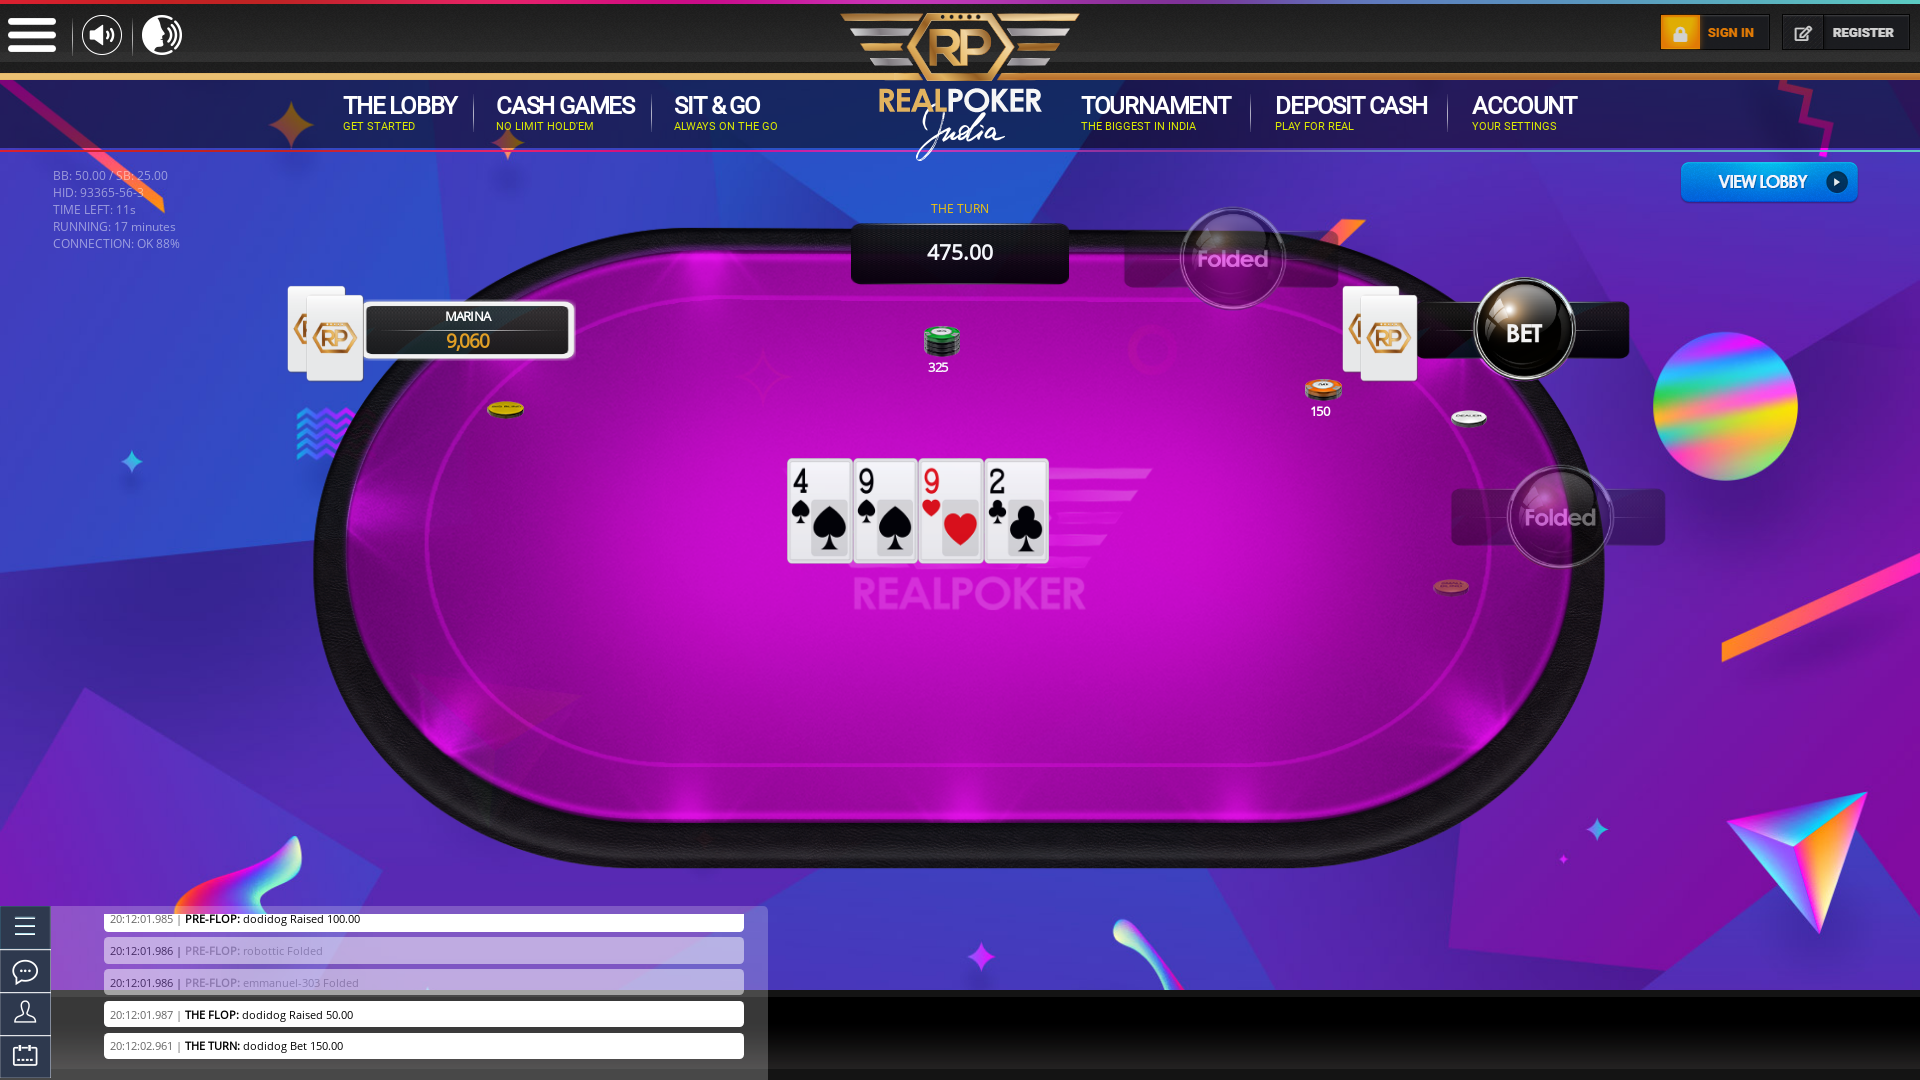 10 player texas holdem table at real poker with the table id 93365